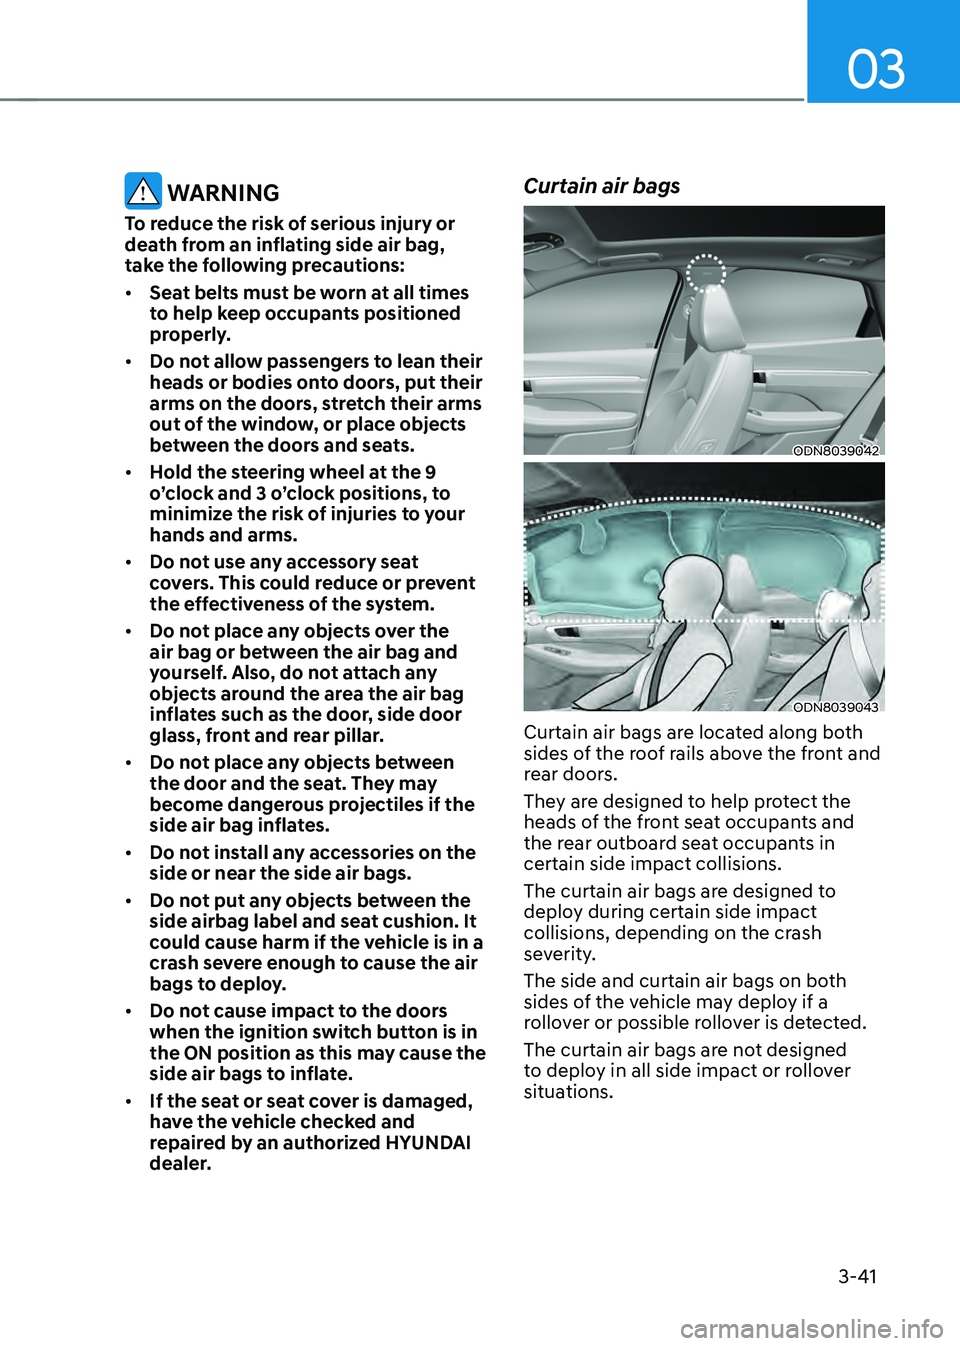 HYUNDAI SONATA HYBRID 2022  Owners Manual 03
3-41
 WARNING
To reduce the risk of serious injury or 
death from an inflating side air bag, 
take the following precautions:
•	Seat belts must be worn at all times 
to help keep occupants positi